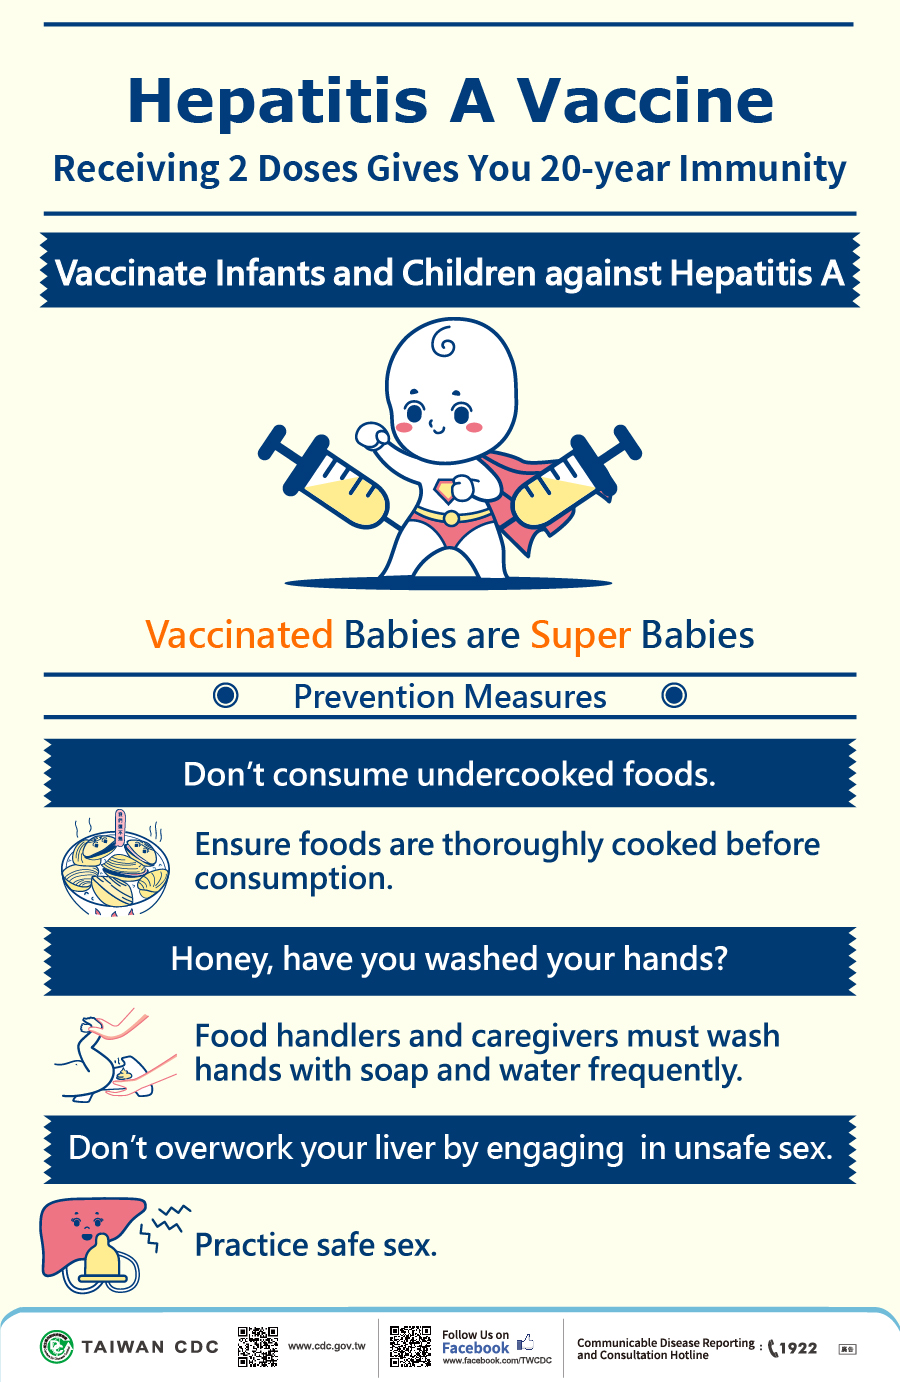 2 Doses of Hepatitis A Vaccine Provide 20 Years of Protection for Infants and Children.jpg